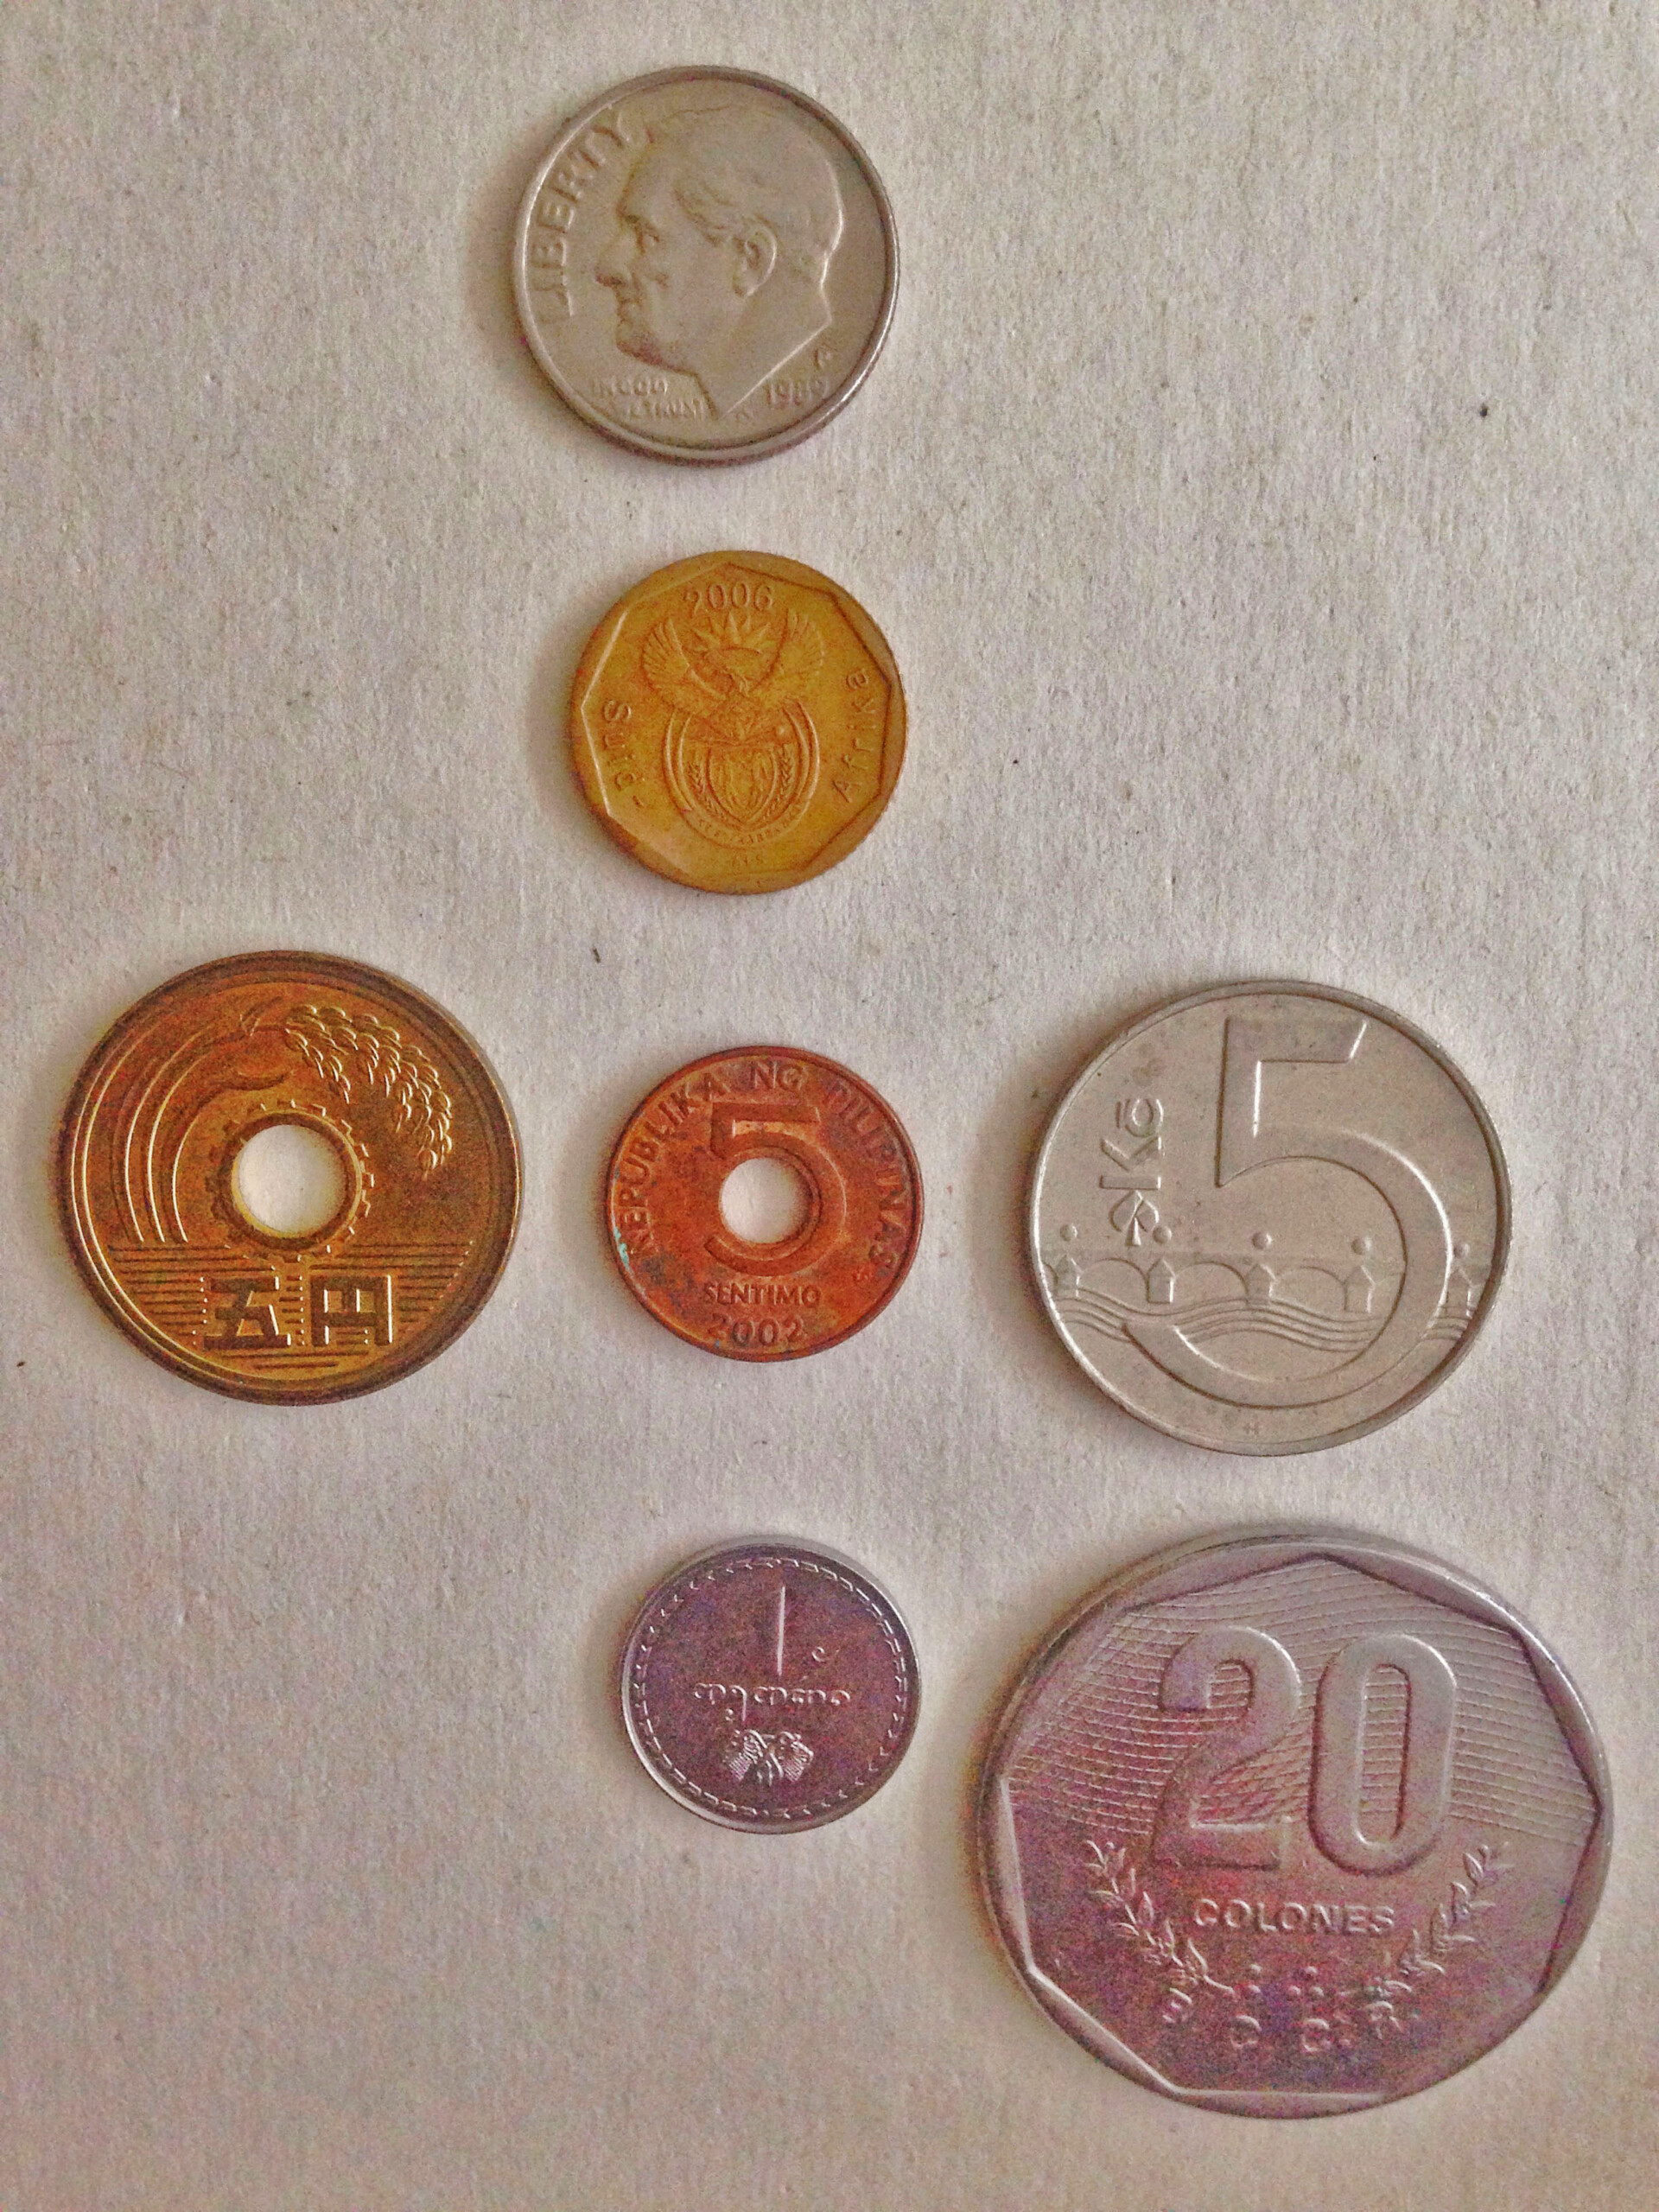 More Obnoxious Coin Shapes